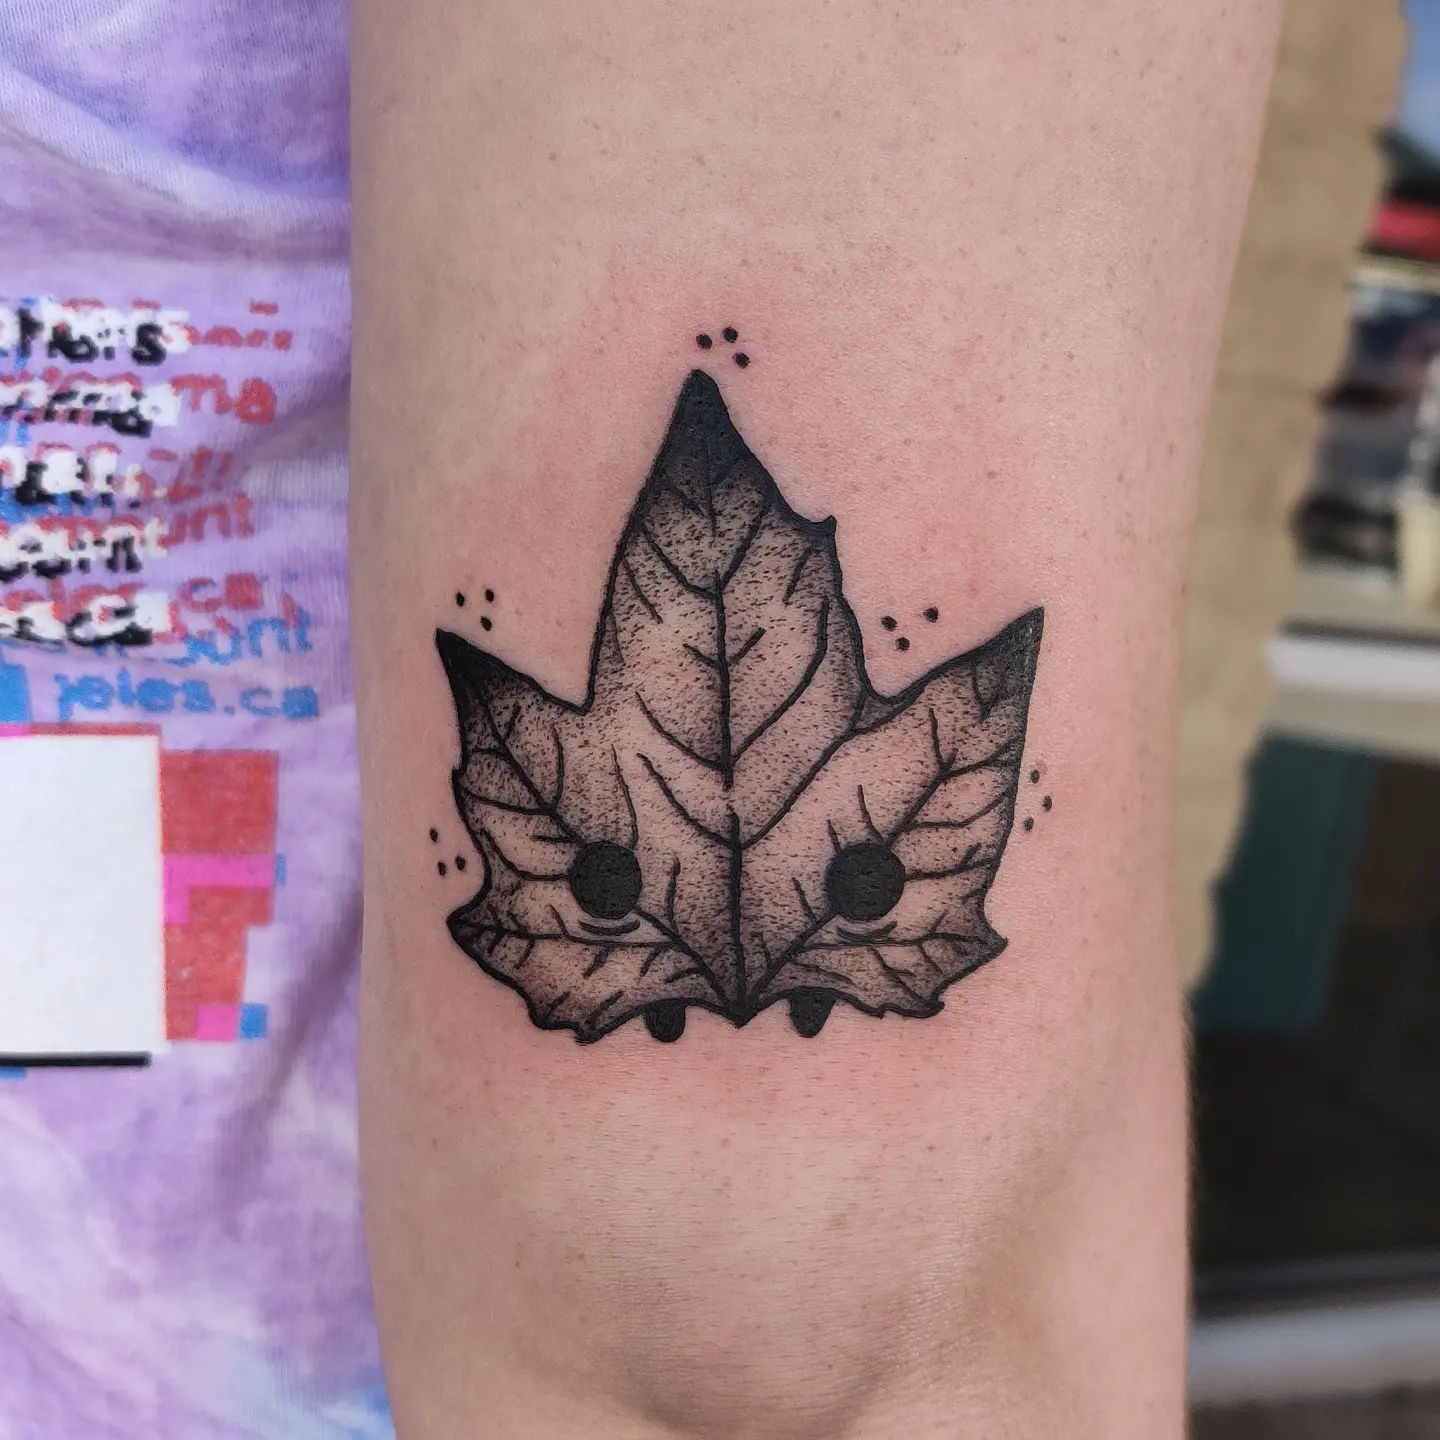 On your back arm, do you want to get a leaf tattoo? Then, this beautiful shady leaf tattoo is definitely for you. Although it is a simple one, its shady details make it great.